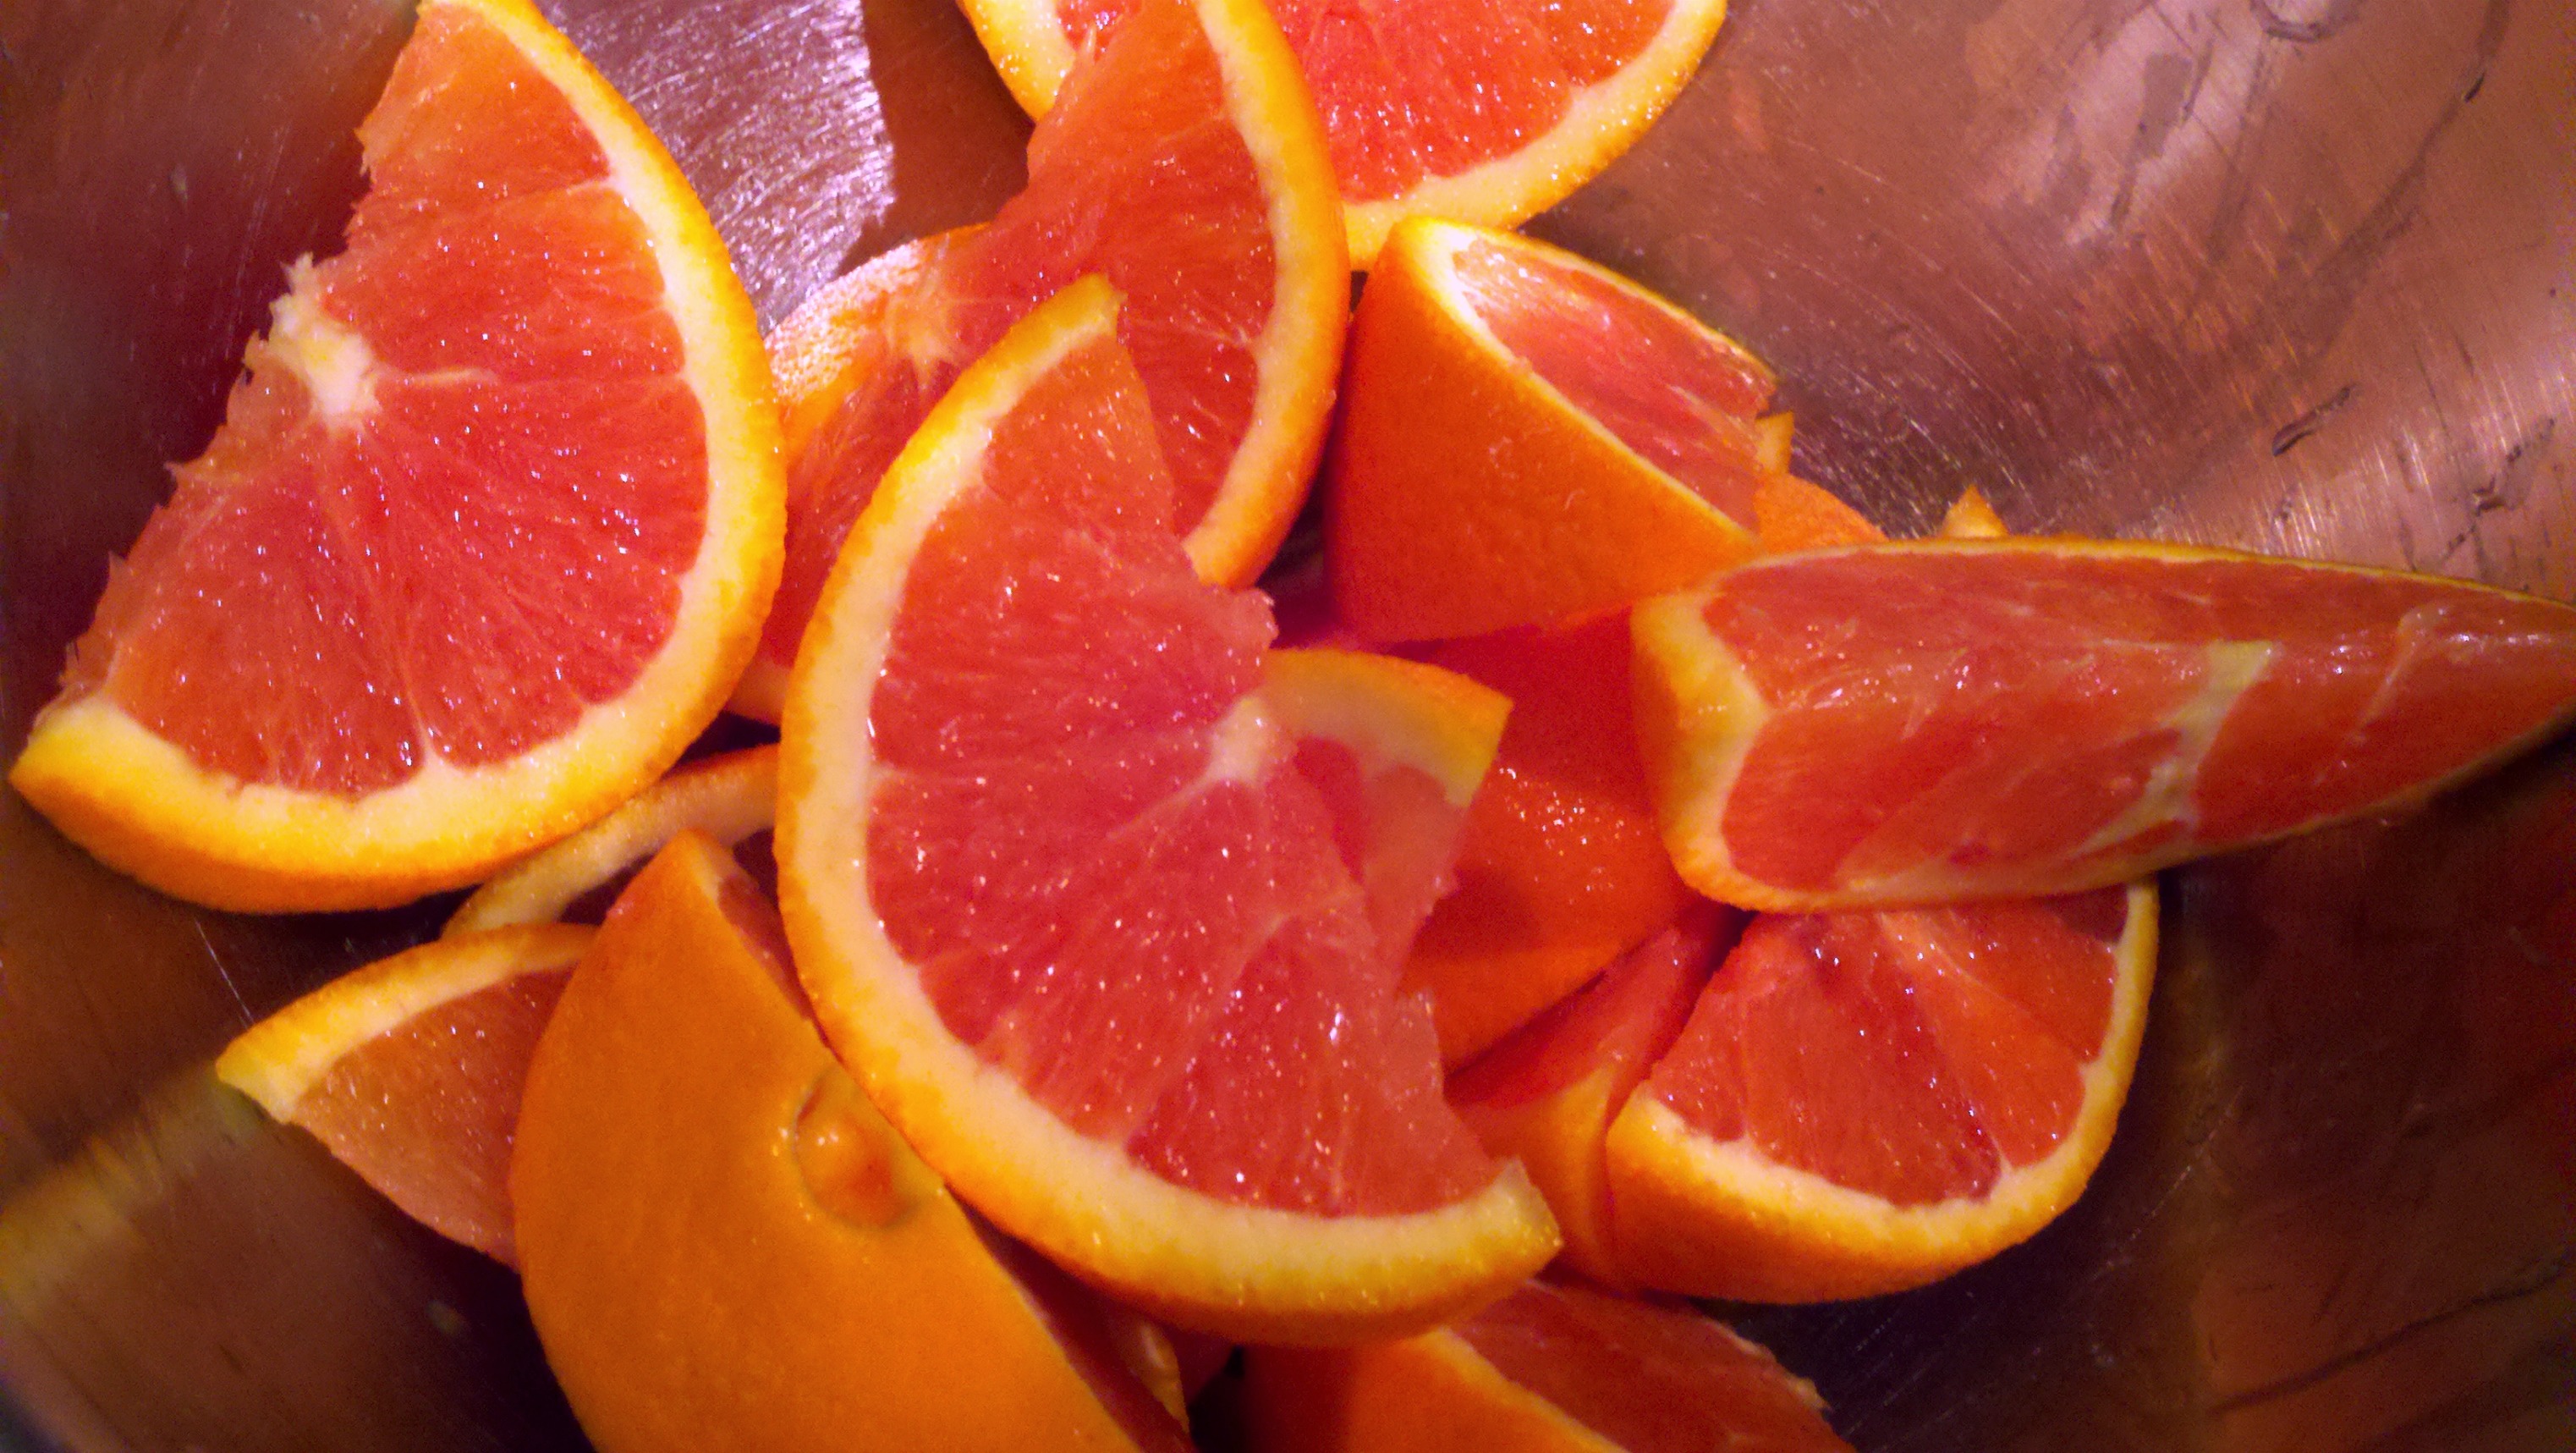 Oranges with Olive Oil and Coarse Salt | Saporific